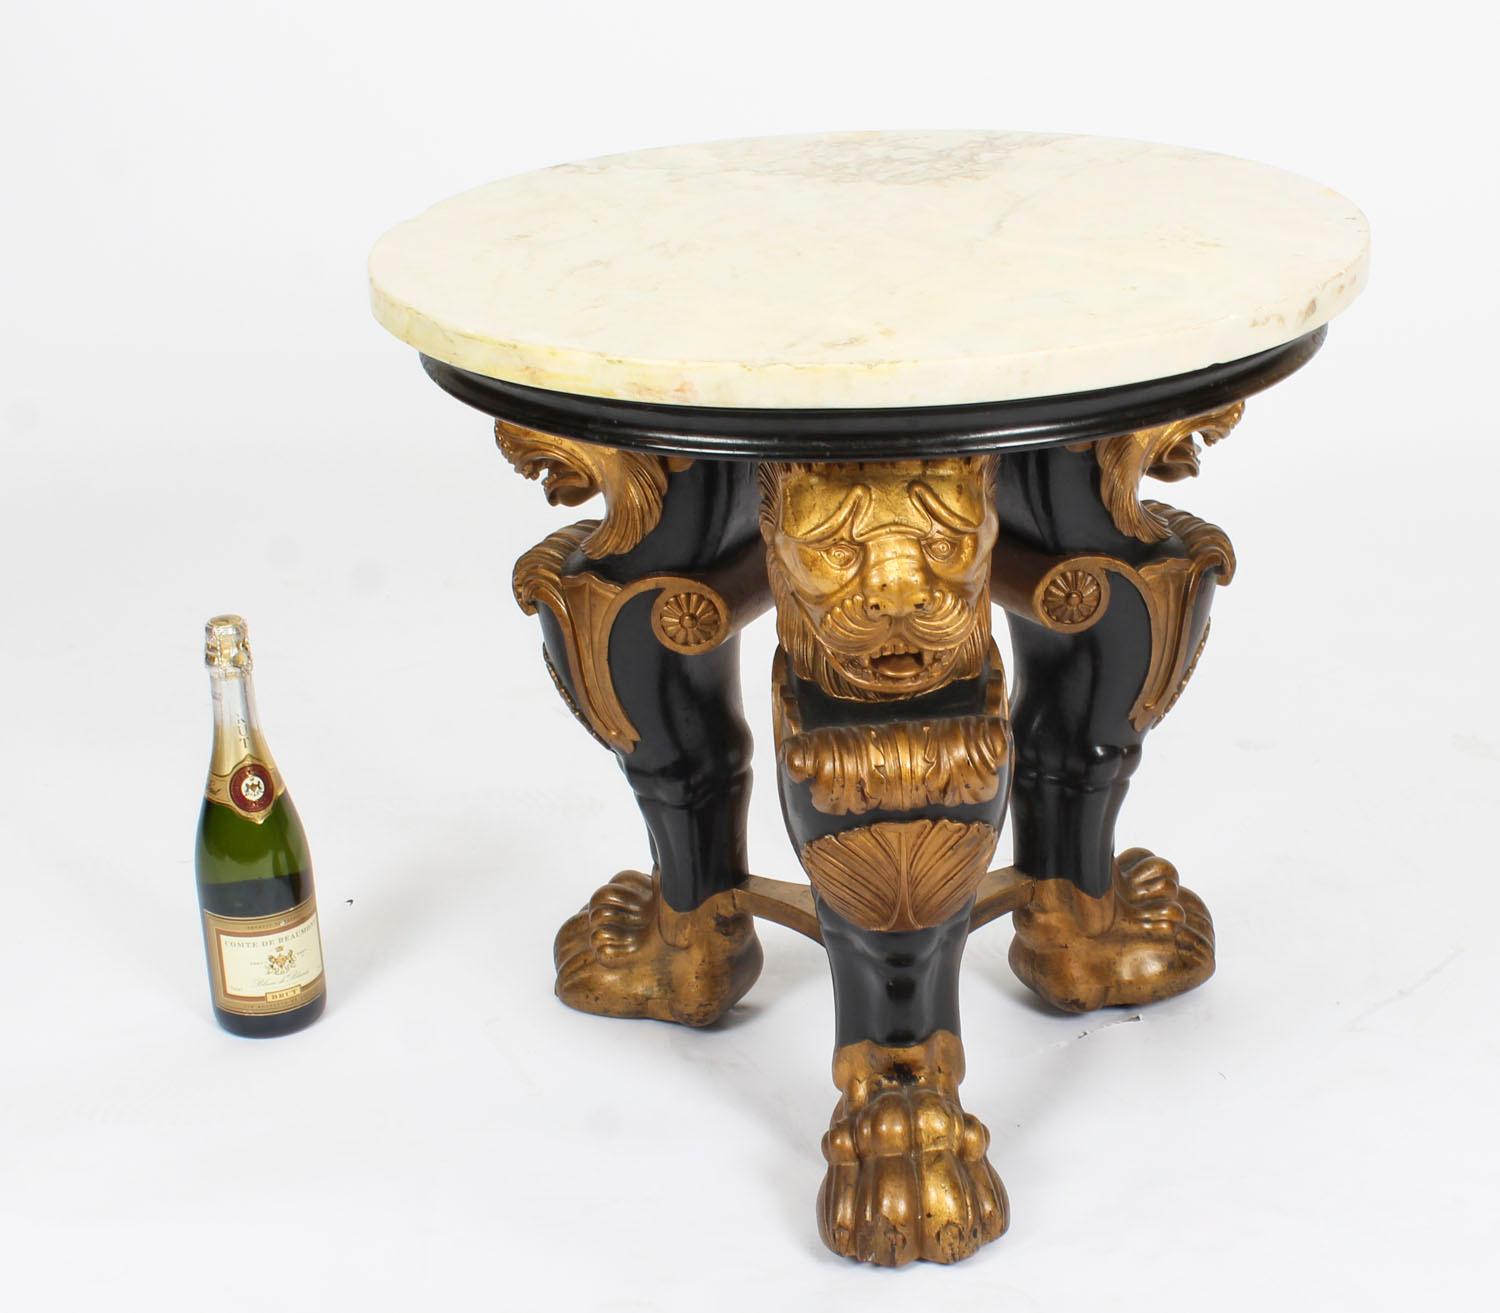 Antique Regency Revival Marble-Top Occasional Table, 19th Century 4